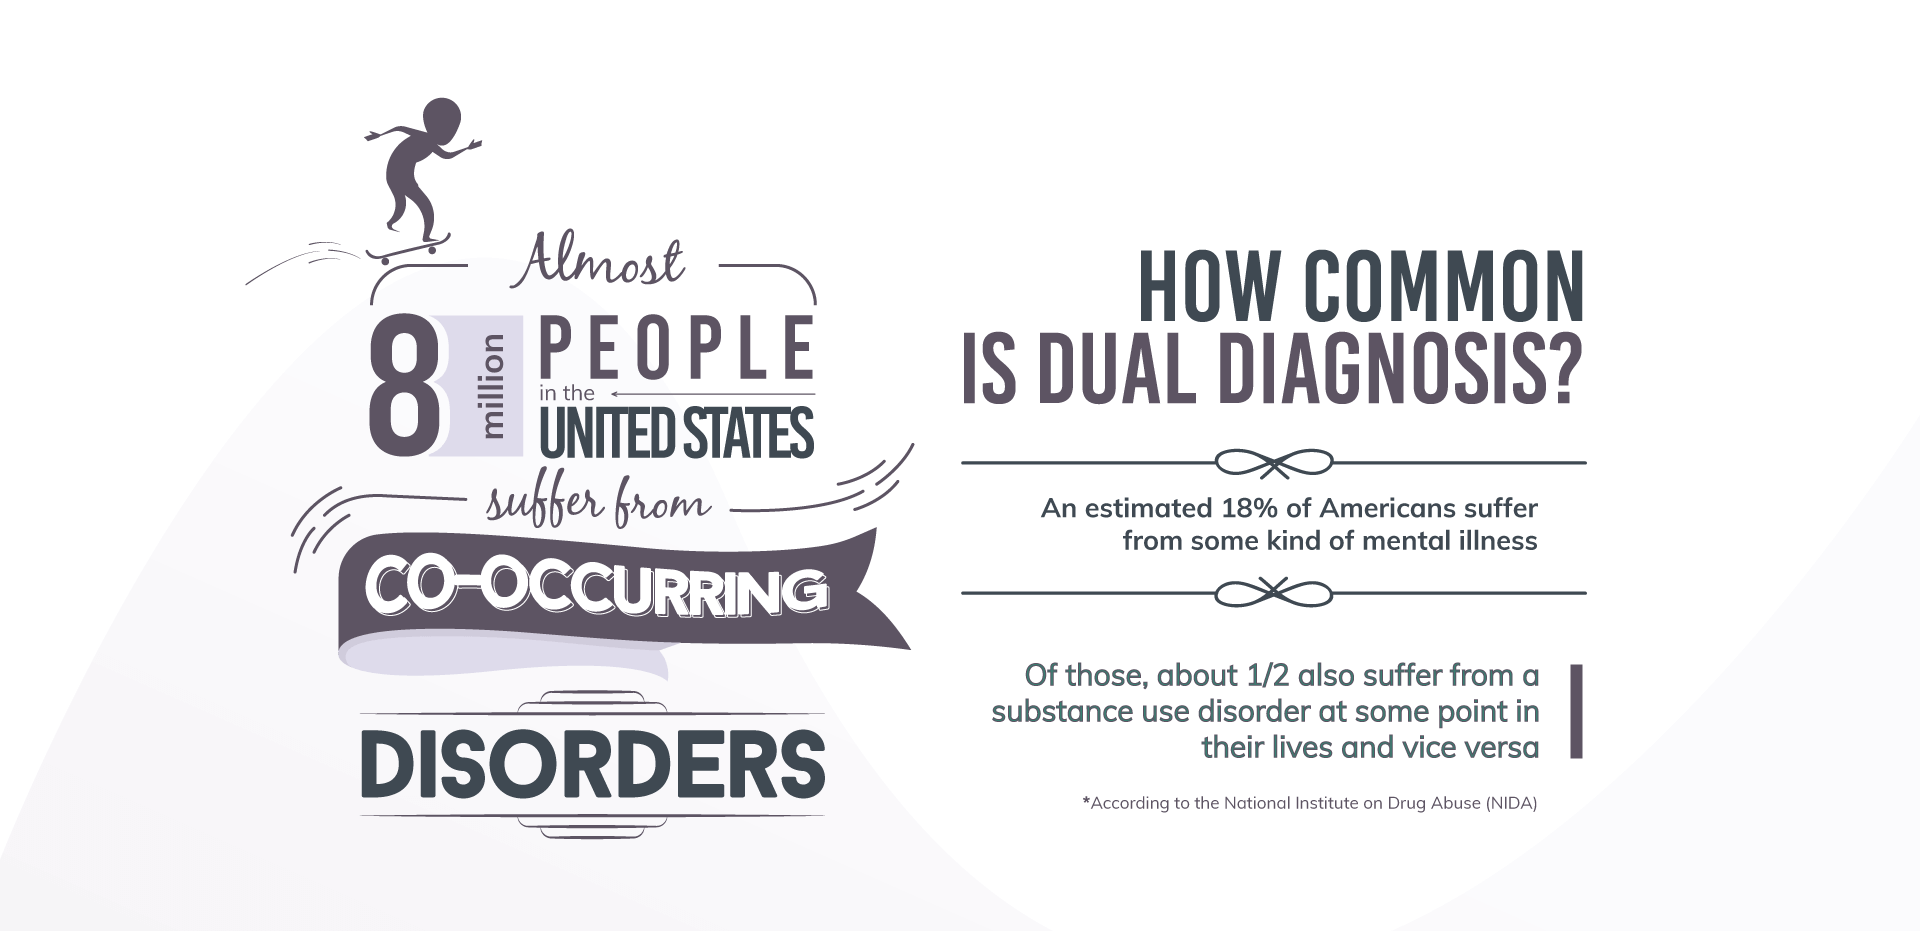 How Common is Dual Diagnosis